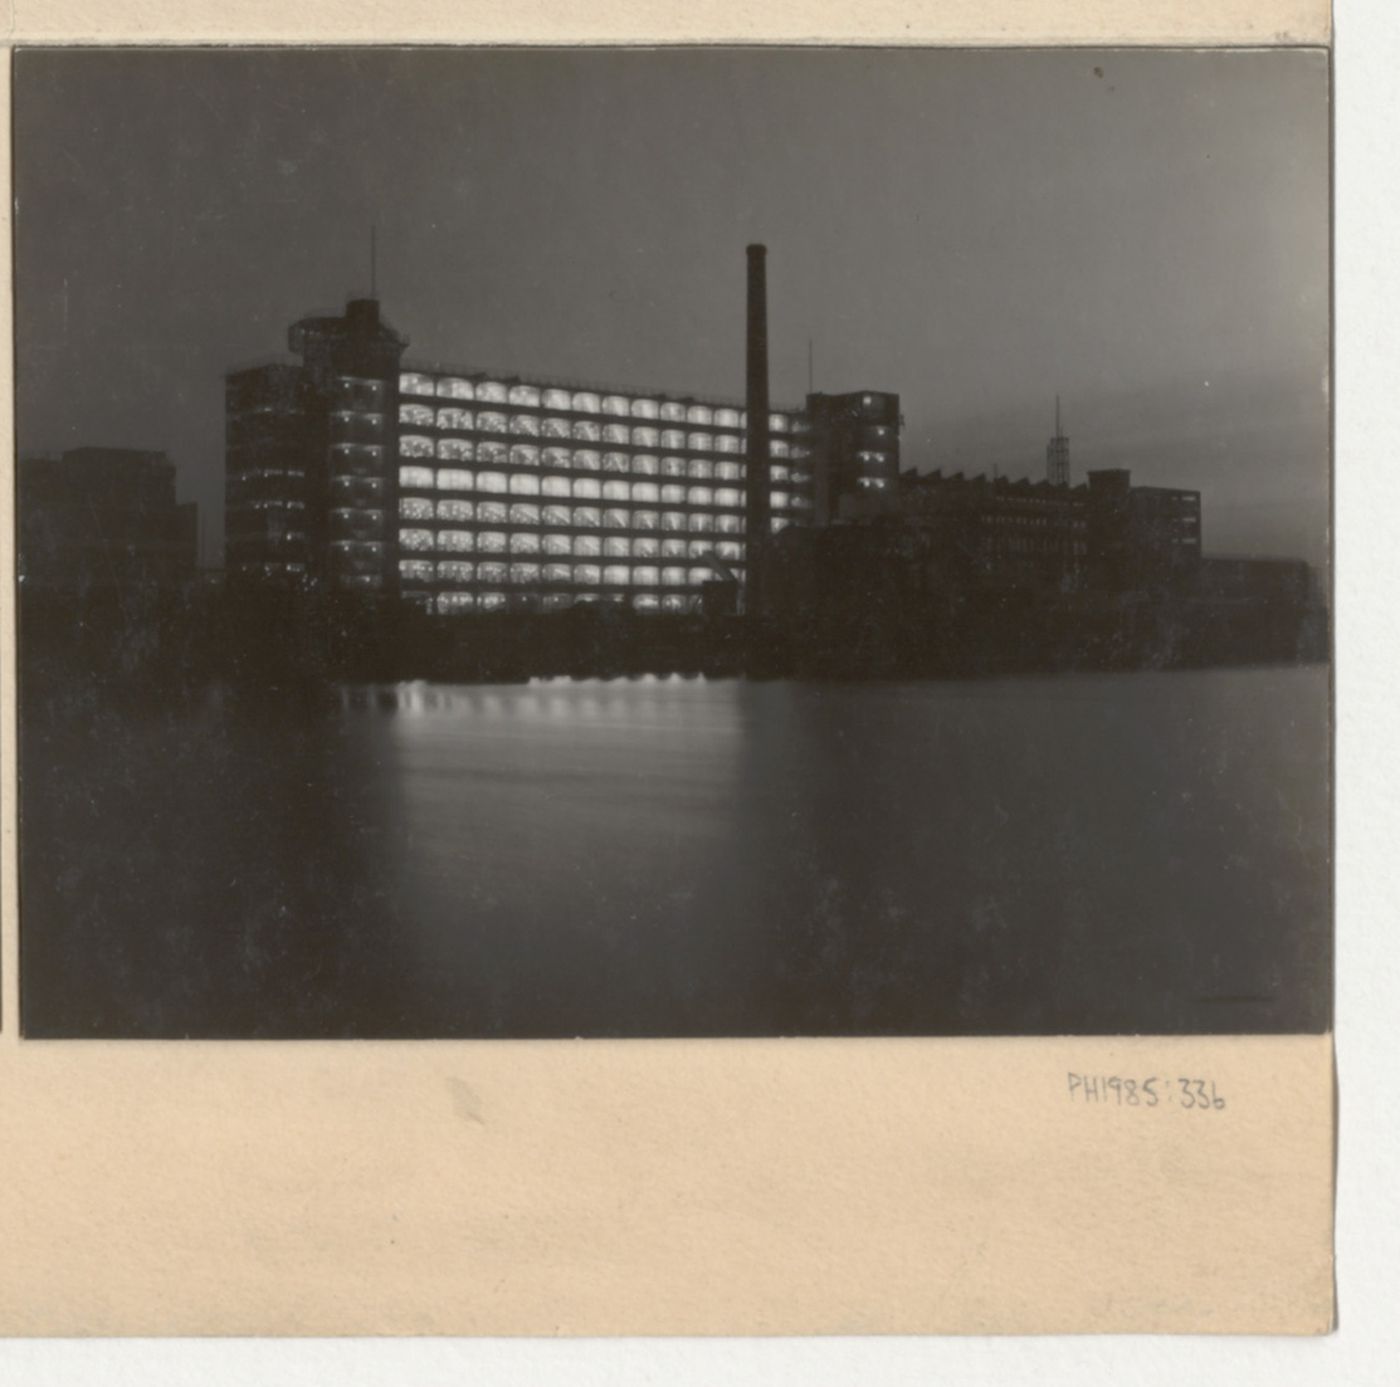 Exterior view of the Van Nelle Factory showing an illuminated office building from across the Rotte [?] River, Rotterdam, Netherlands